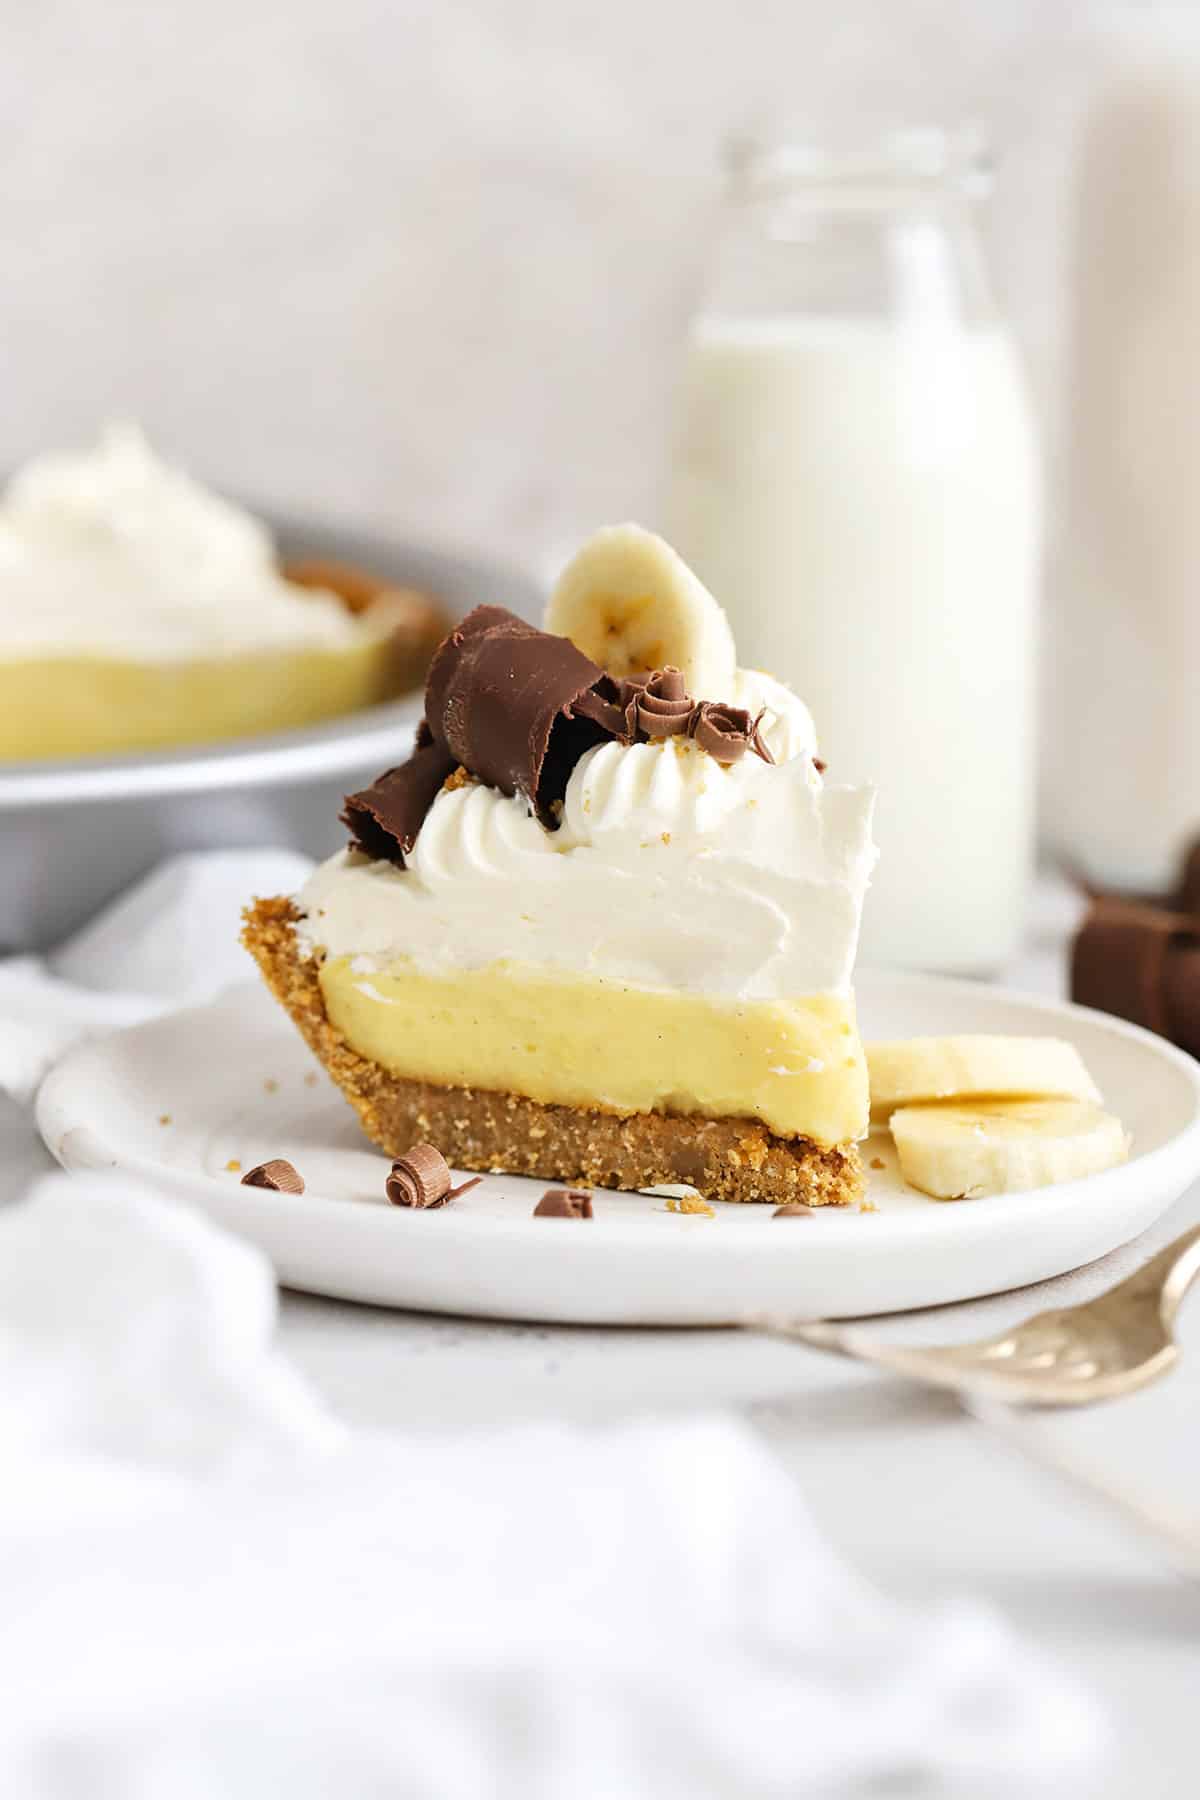 Front view of a slice of gluten-free banana cream pie topped with whipped cream and chocolate curls